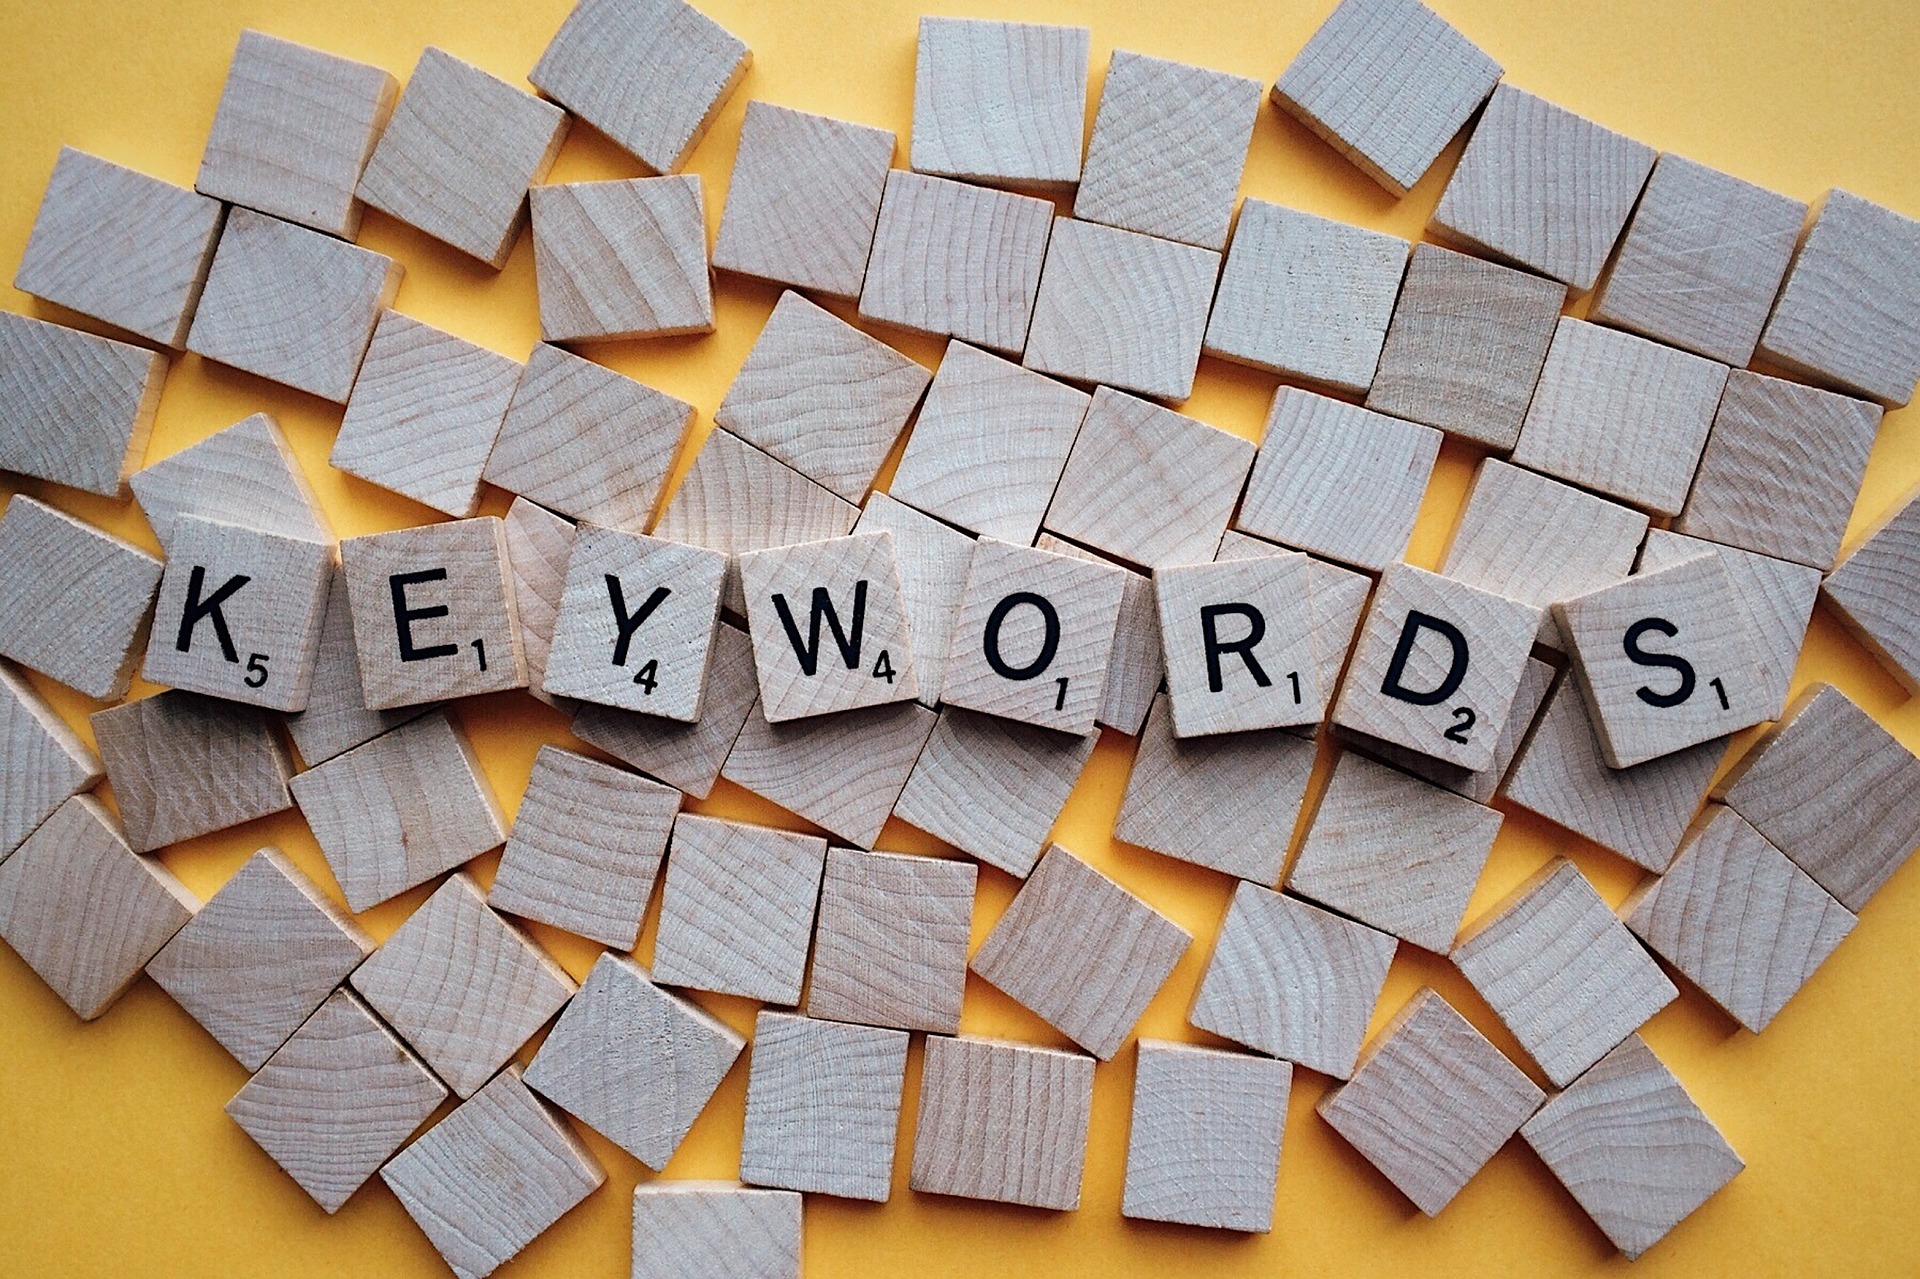 Importance of keyword research